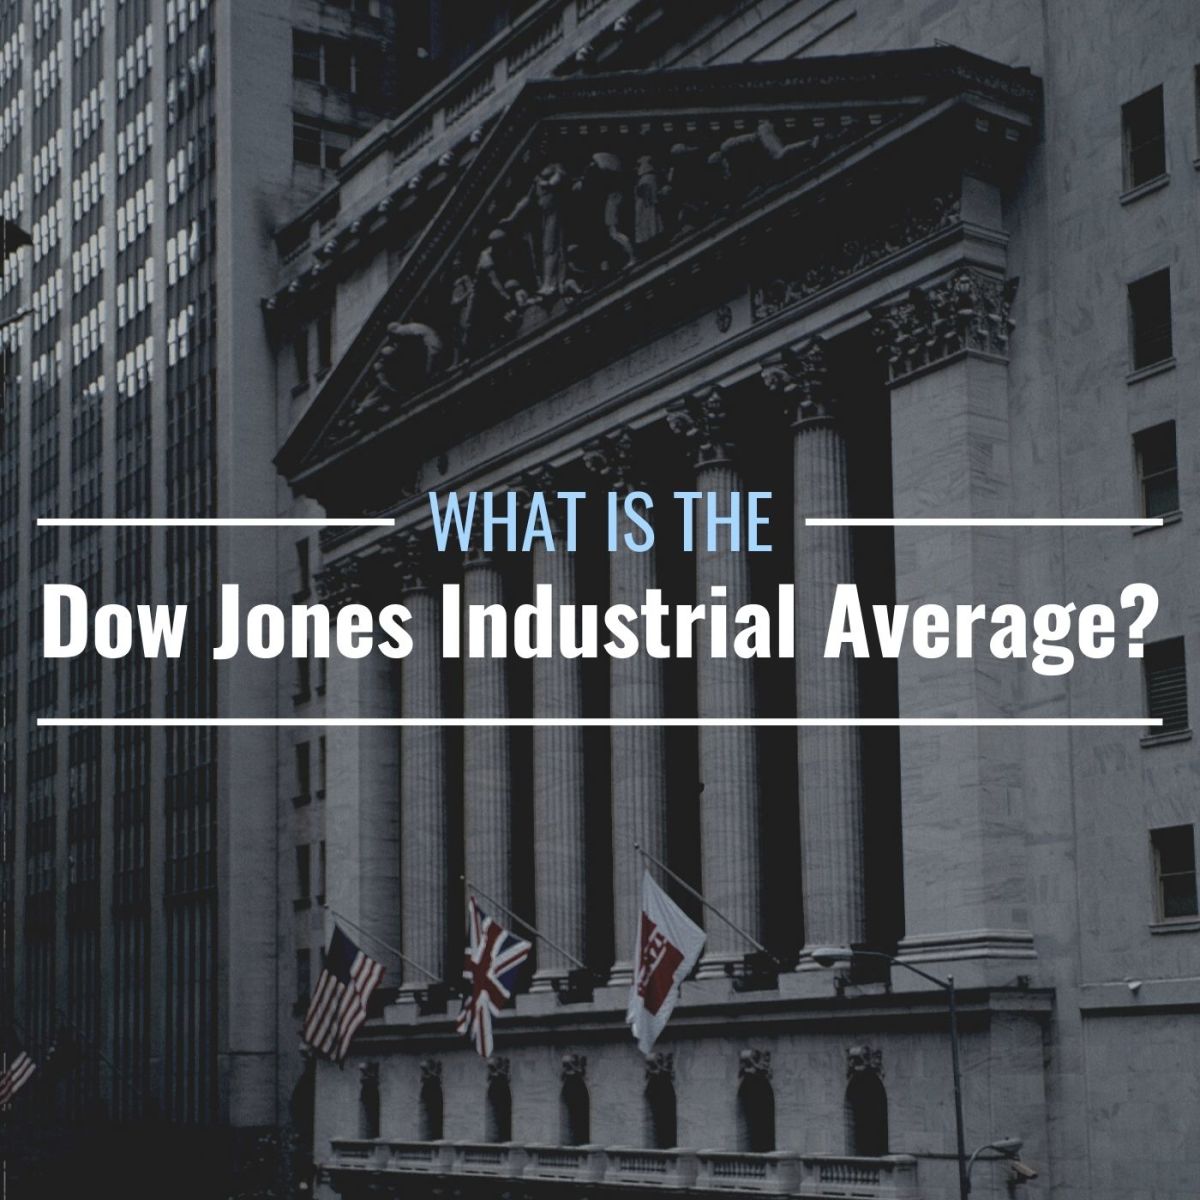 Darkened photo of the NYSE building with text overlay that reads "What Is the Dow Jones Industrial Average?"